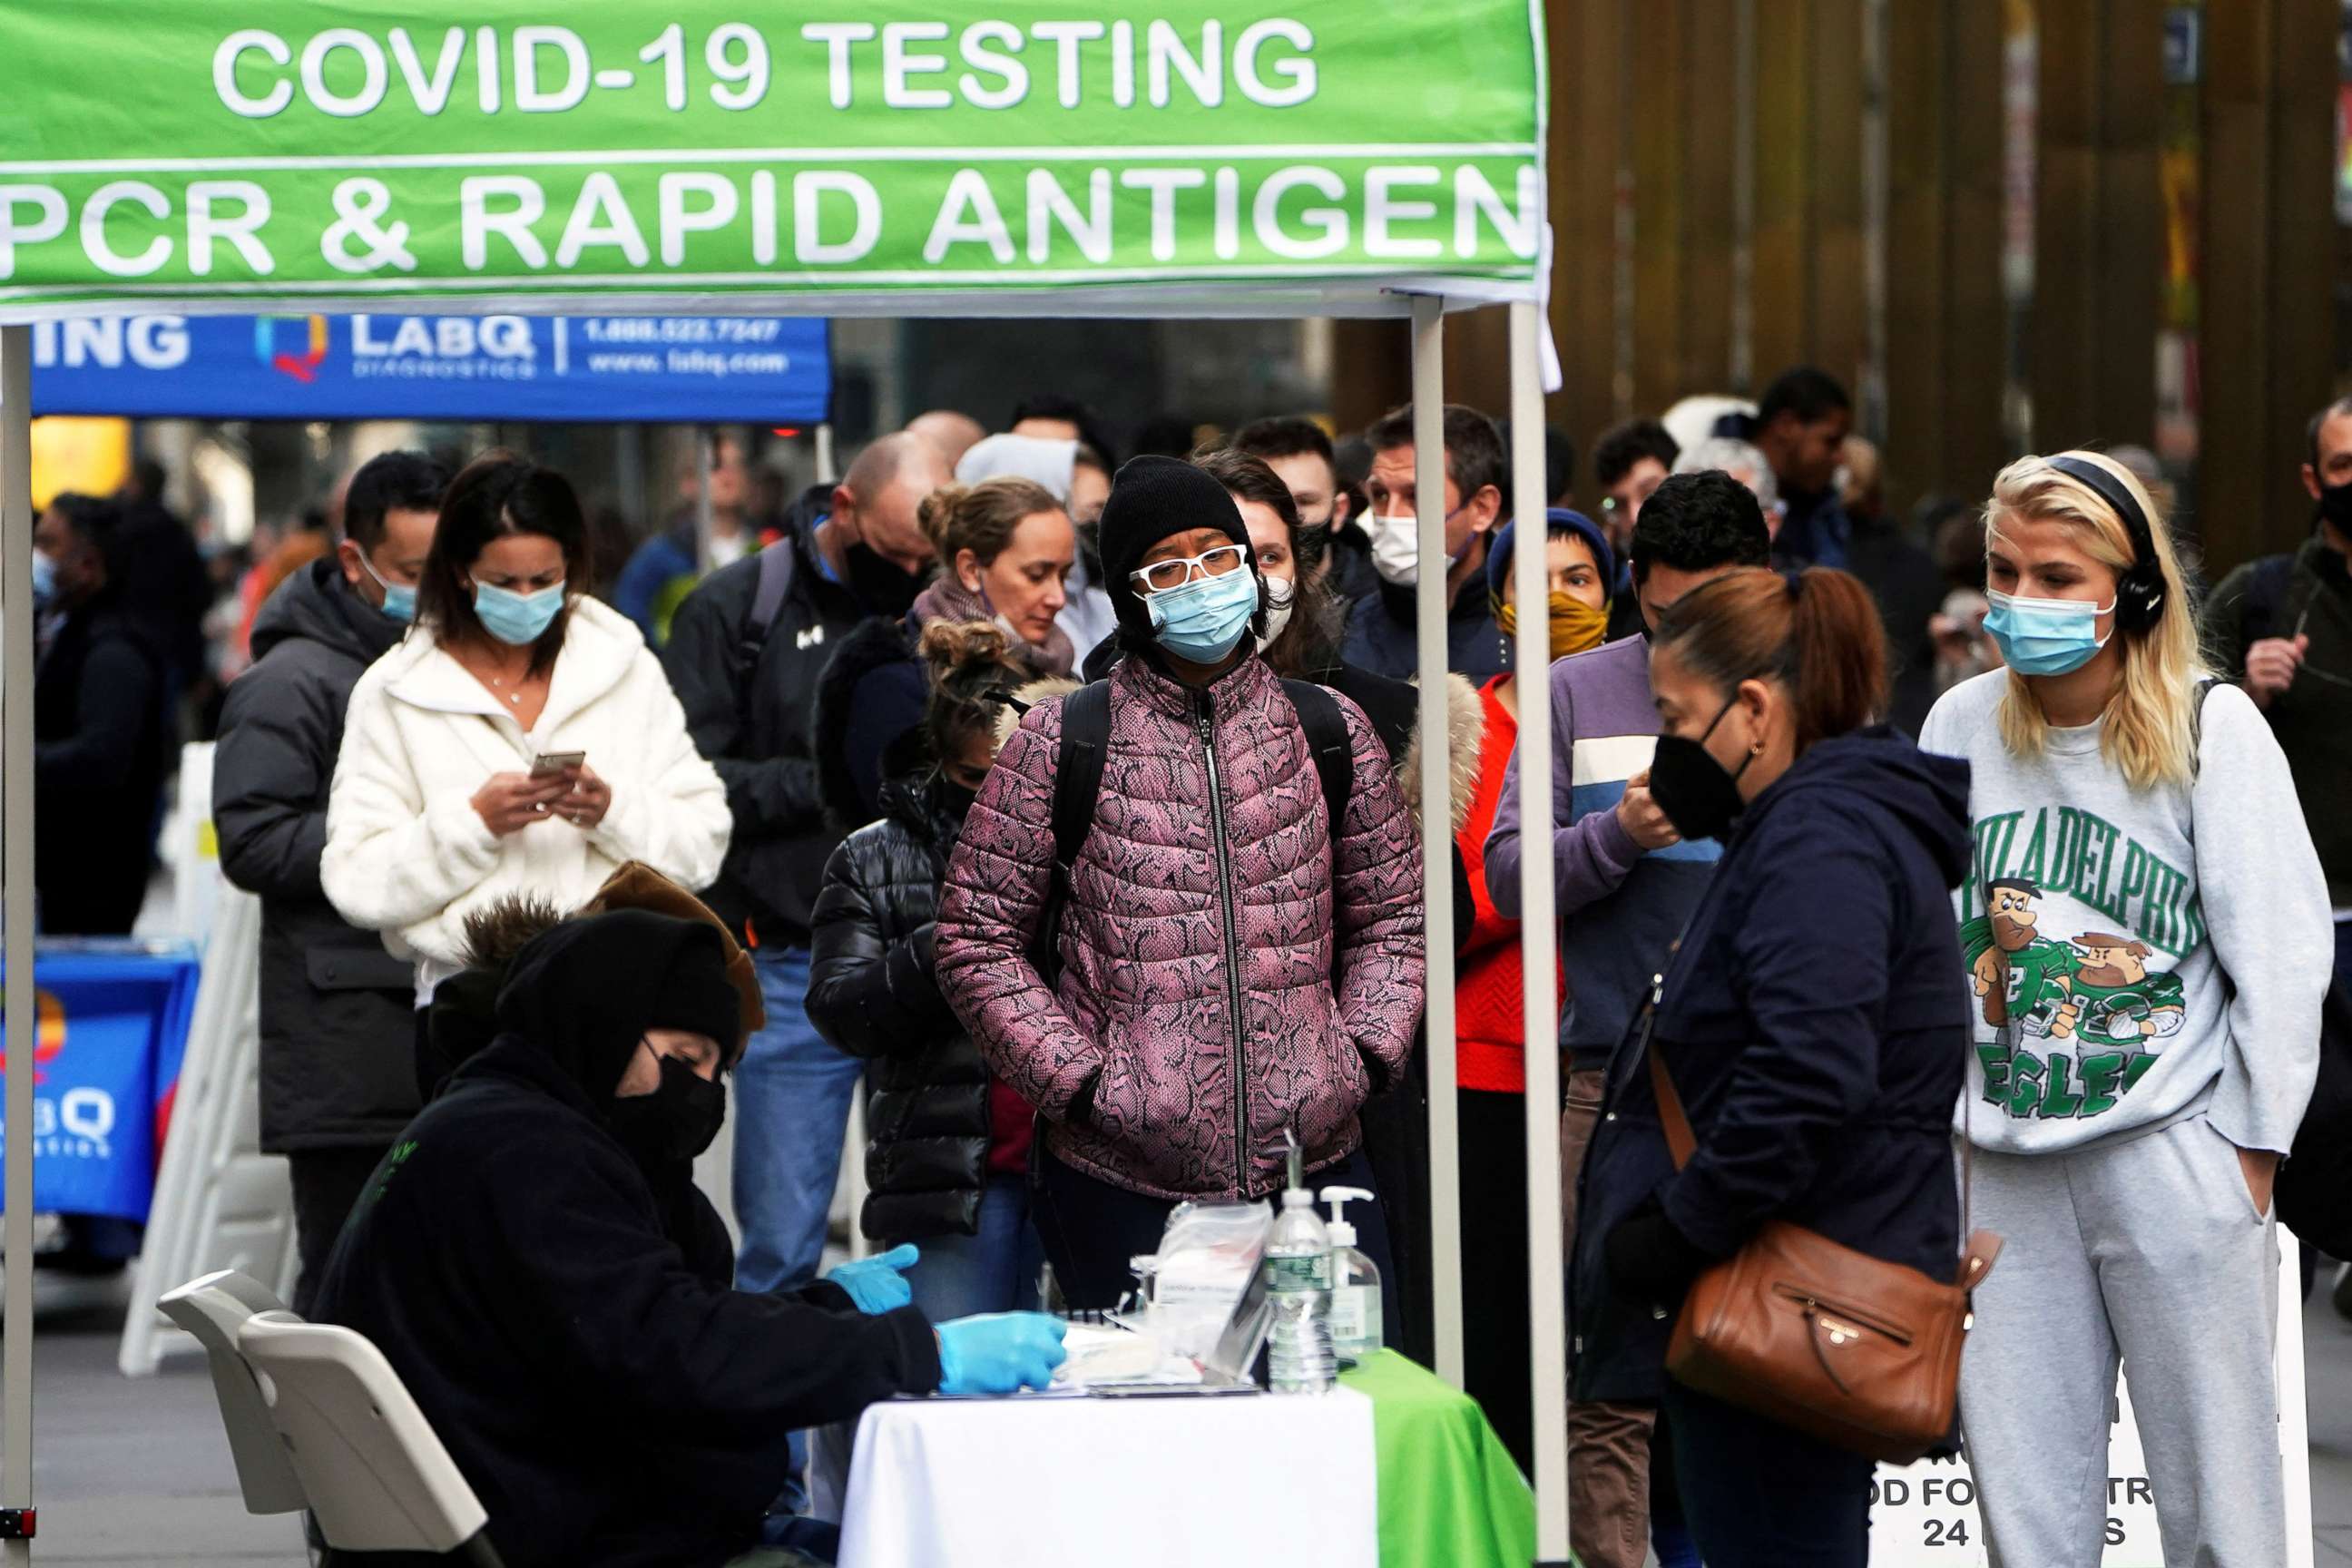 PHOTO: People line up at a COVID-19 mobile testing site during the coronavirus disease pandemic in New York, Dec. 17, 2021.